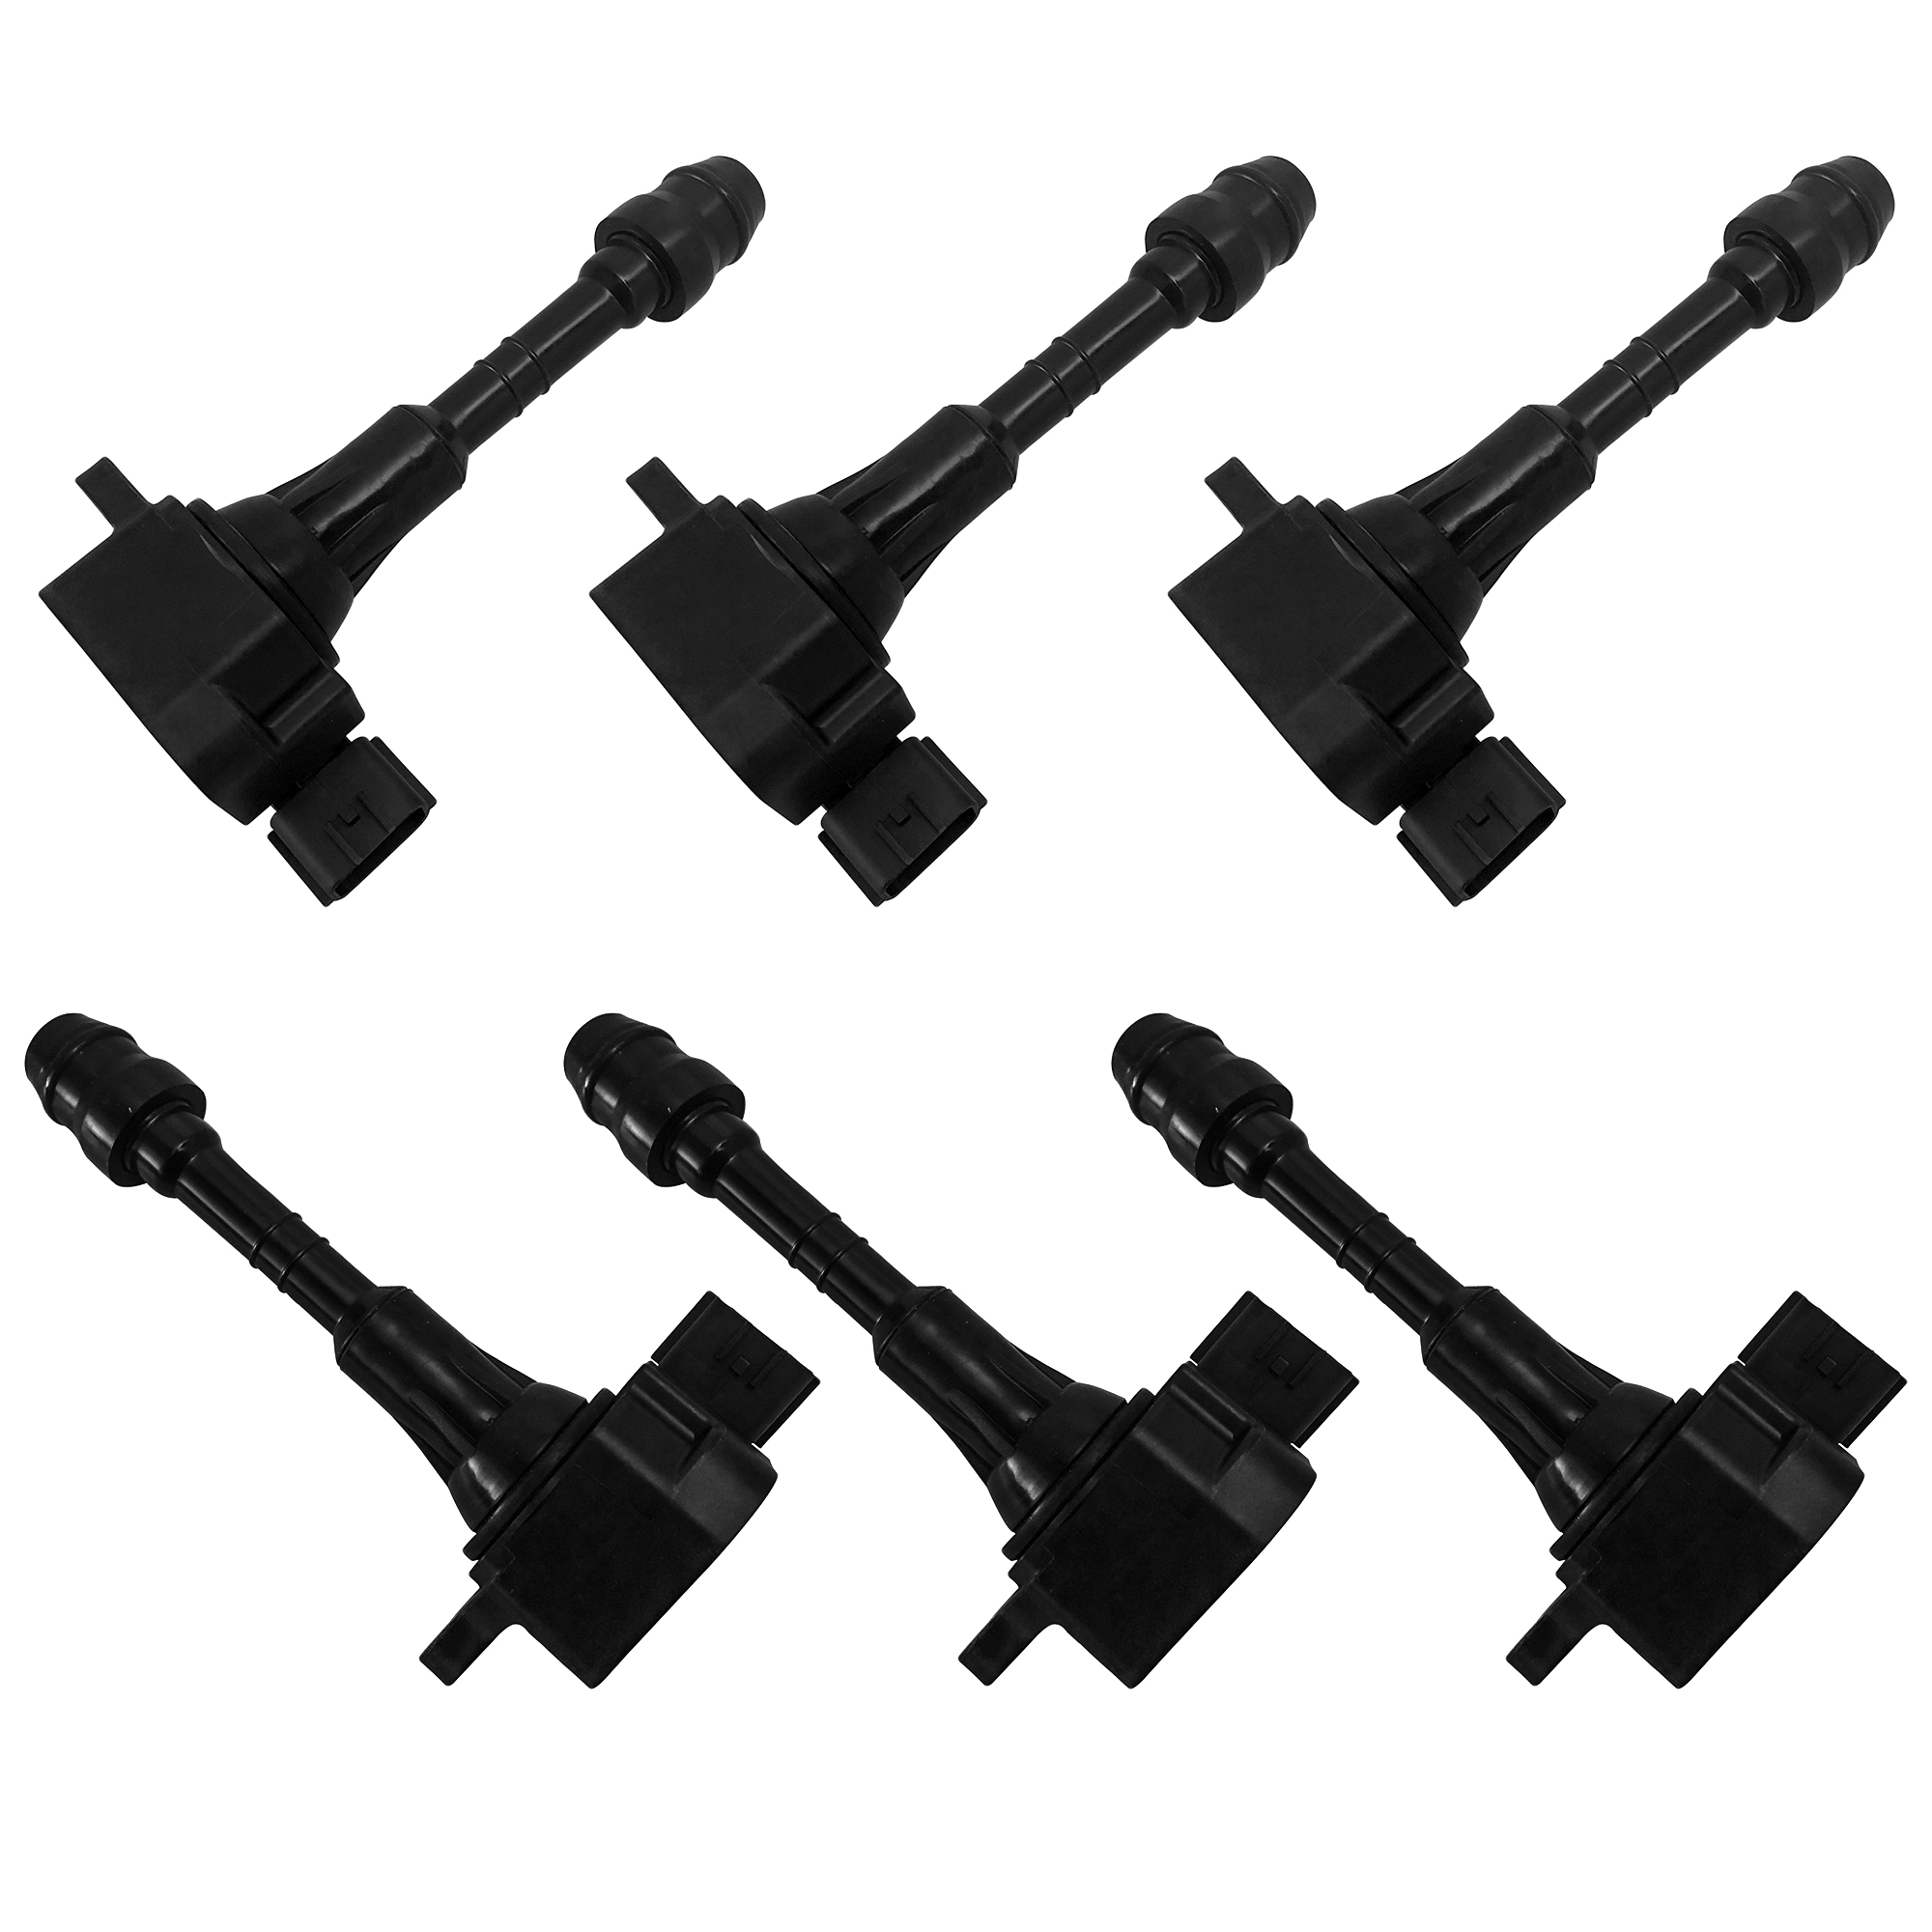 BOXI Pack of Ignition Coils Fits 02-04 Infiniti I35/02-03 QX4, 02-06  Nissan Altima/05-13 Frontier/02-08 Maxima/03-07 Murano/12-13 NV 1500/02-04  Pathfinder/04-09 Quest/05-13 Xterra 22248-8J115